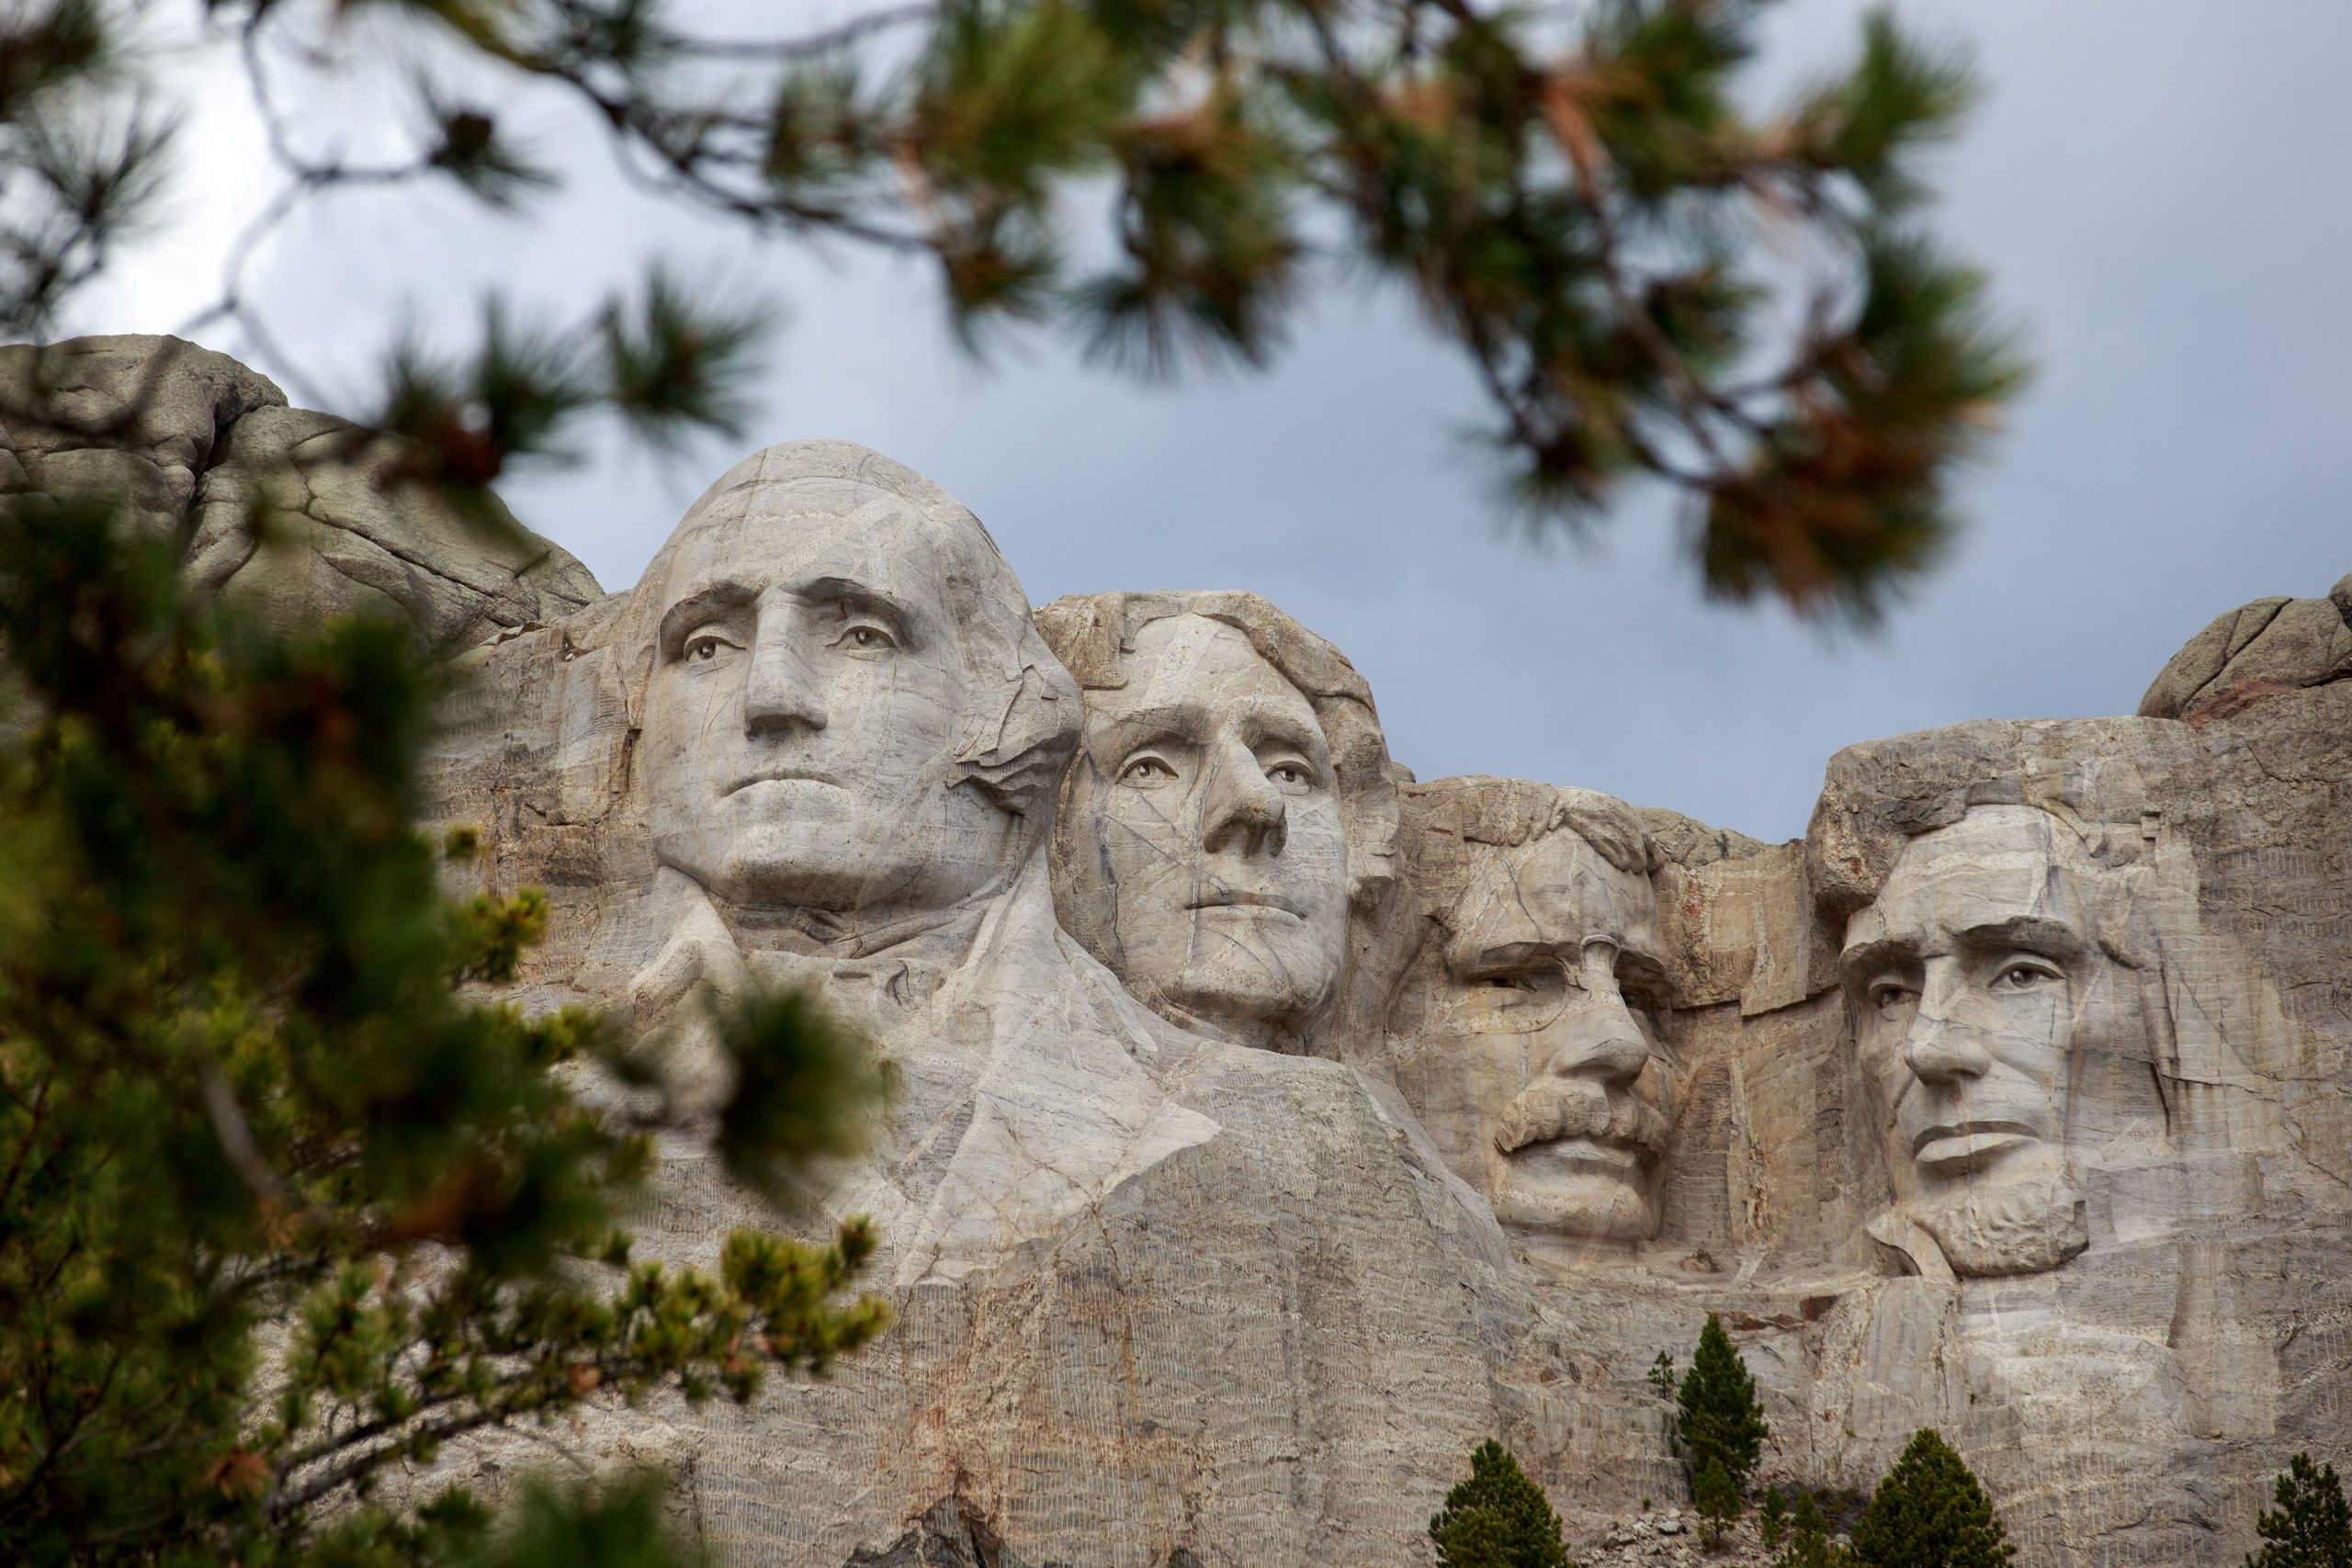 Mount Rushmore National Memorial in Keystone, South Dakota, is pictured on April 23.